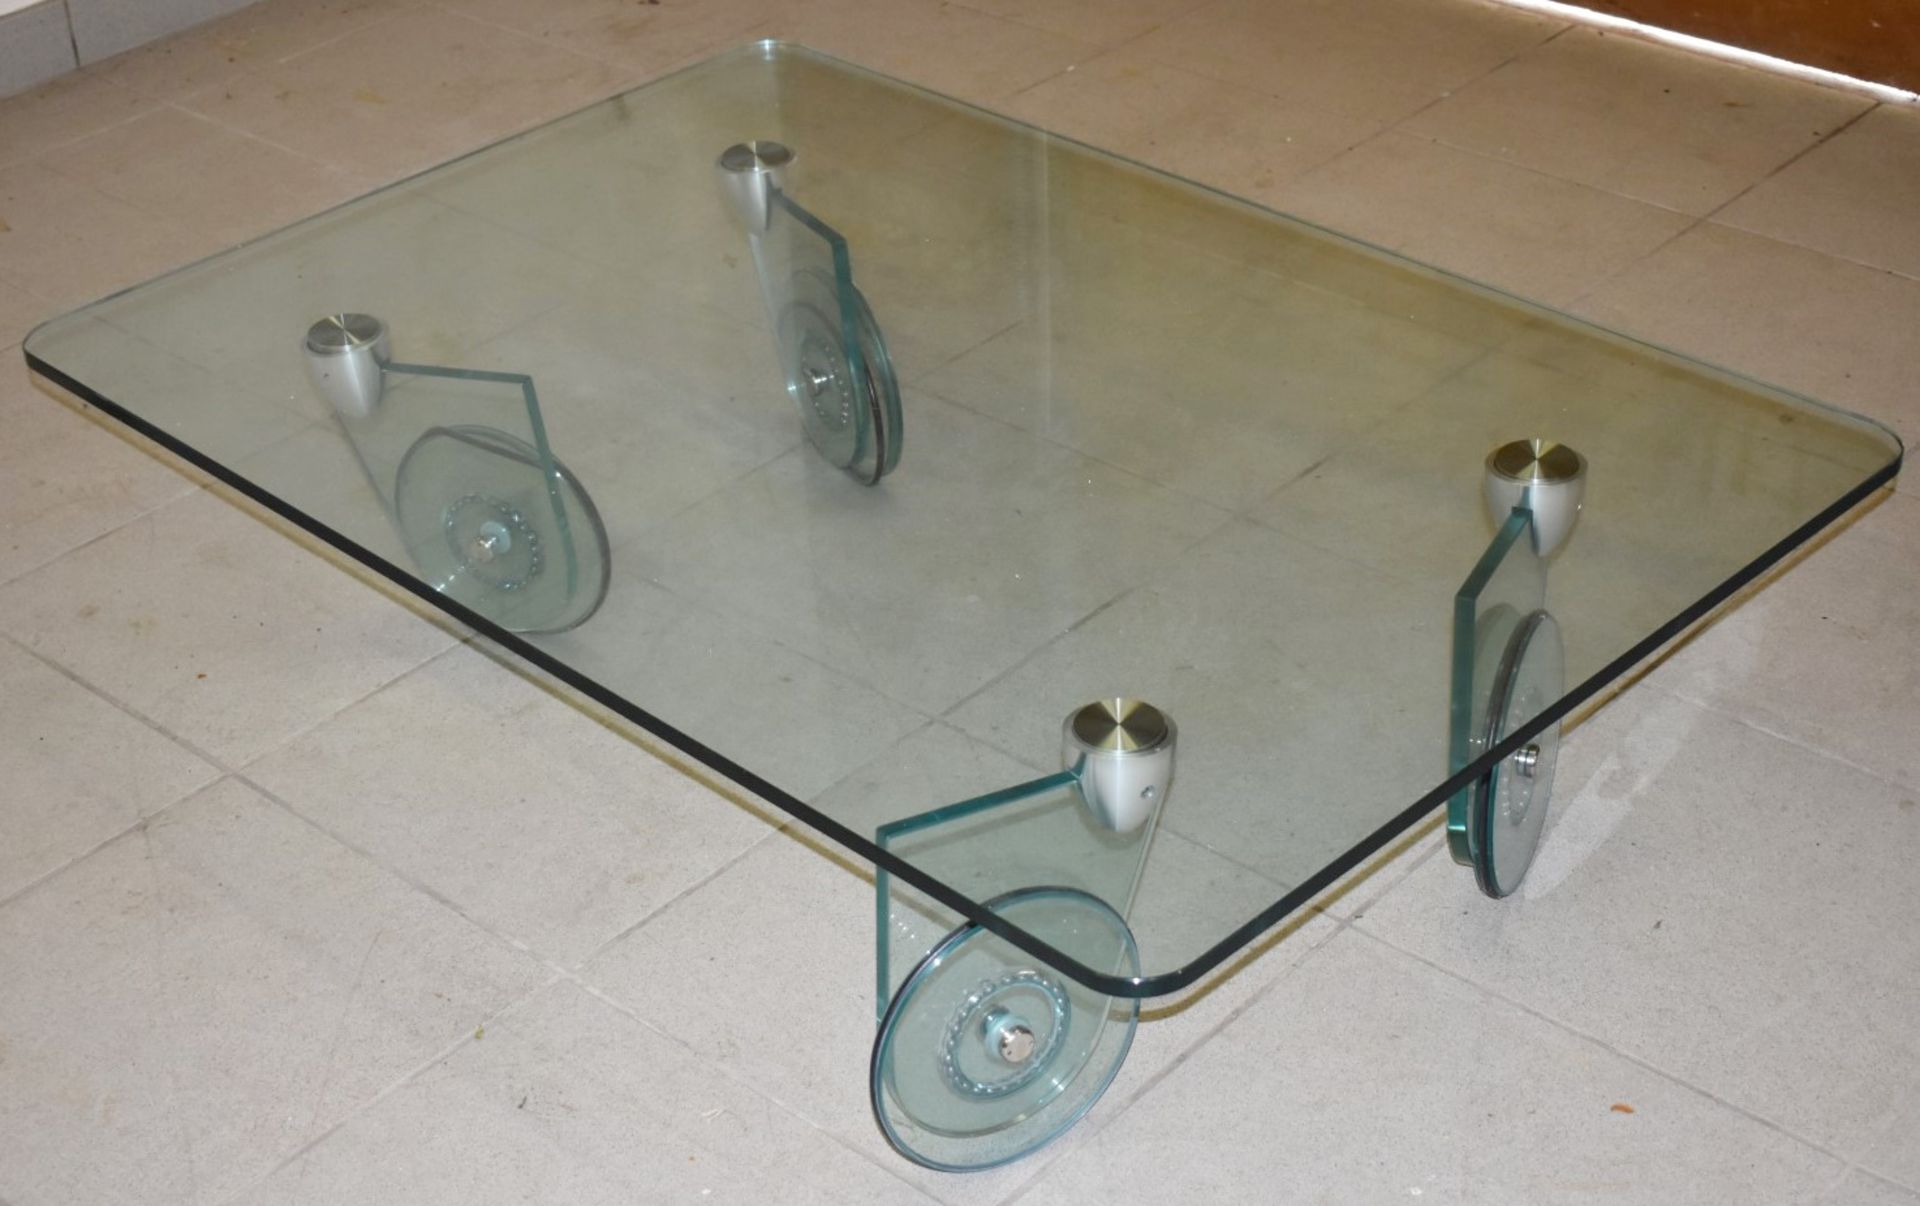 1 x Glass Coffee Table With 2cm Thick Top and Wheel Design Legs - Dimensions: H30 x W125 x D85 cms -